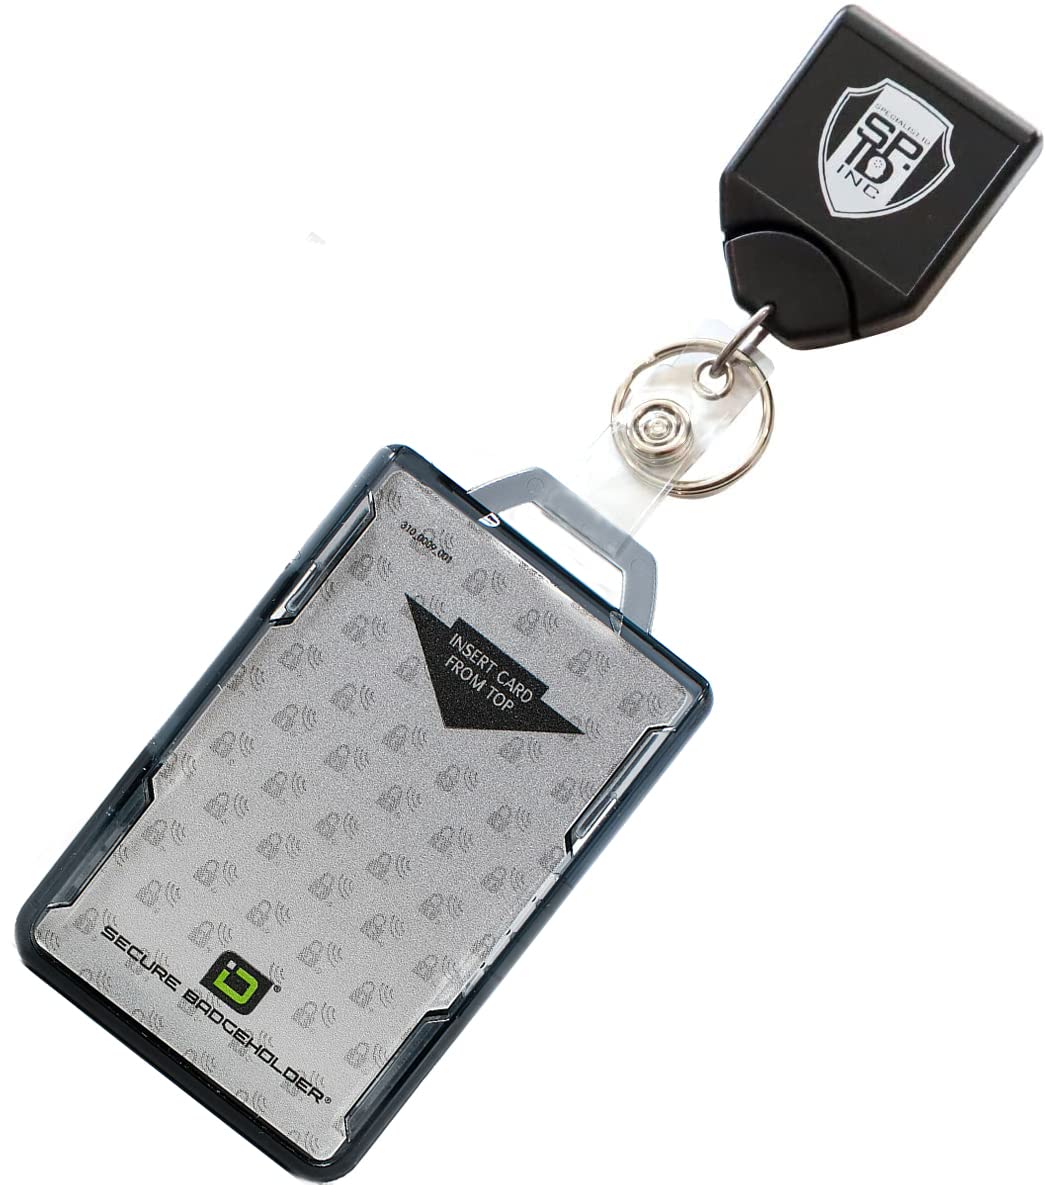 Book Cover Heavy Duty Retractable Badge Reel with RFID Blocking Badge Holder - Identity Stronghold Multi Card Holder w/Key Ring for Two Badges - Square No Twist Reel for Military, Security by Specialist ID 1 Single Black